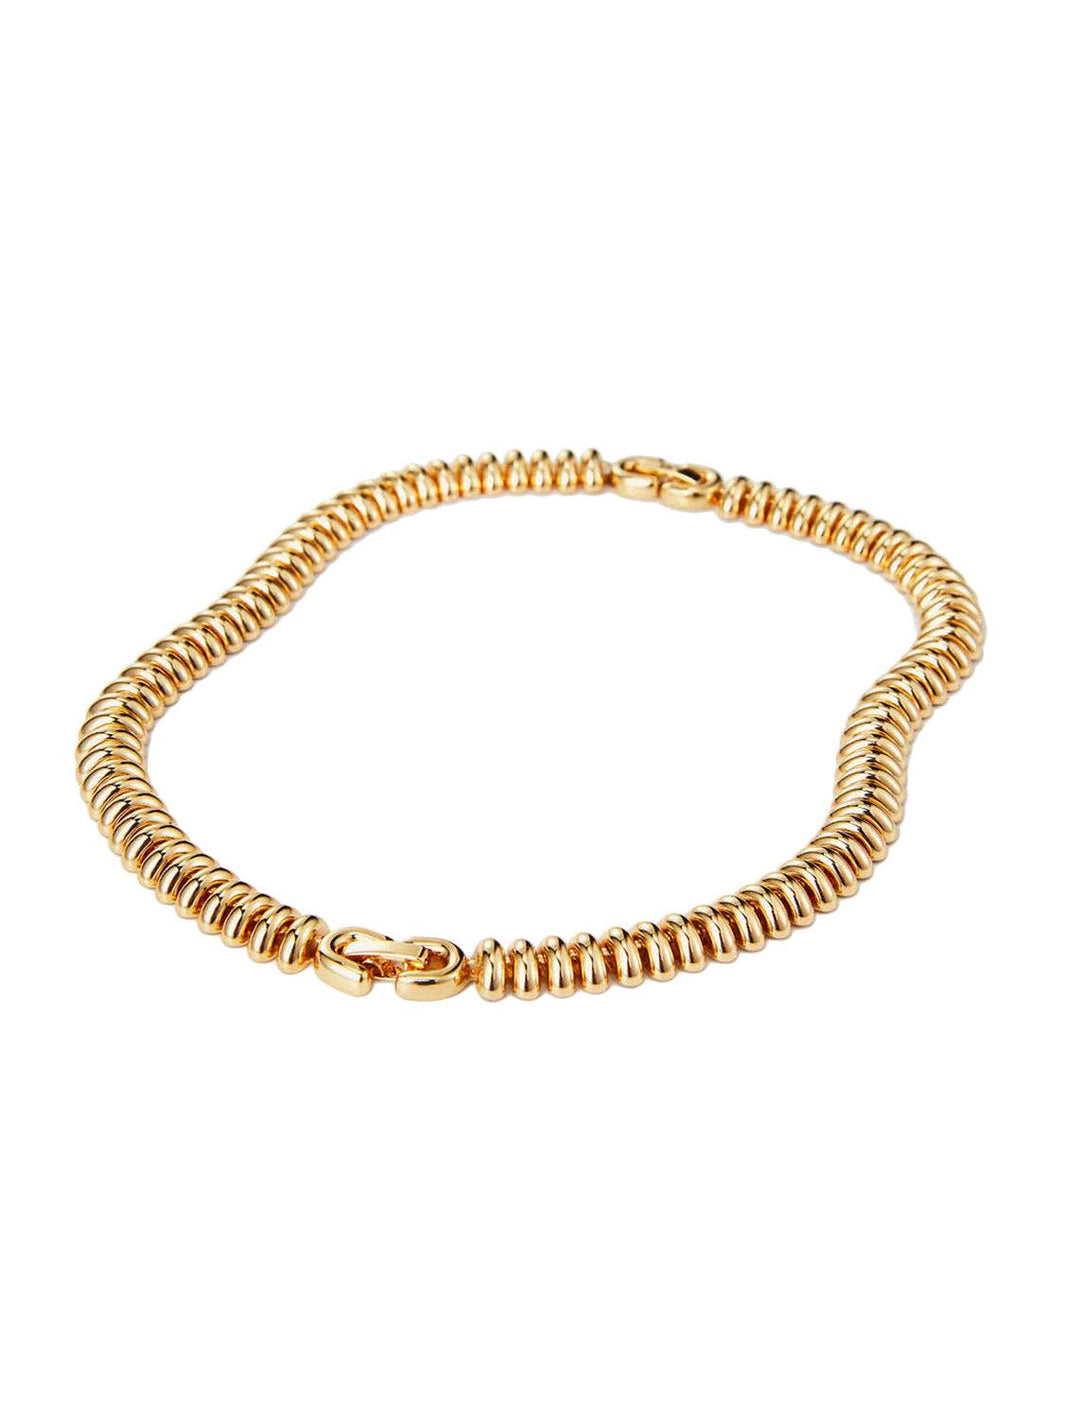 Front view of Jenny Bird's Sofia Choker Necklace in Gold Tone Dipped Brass.